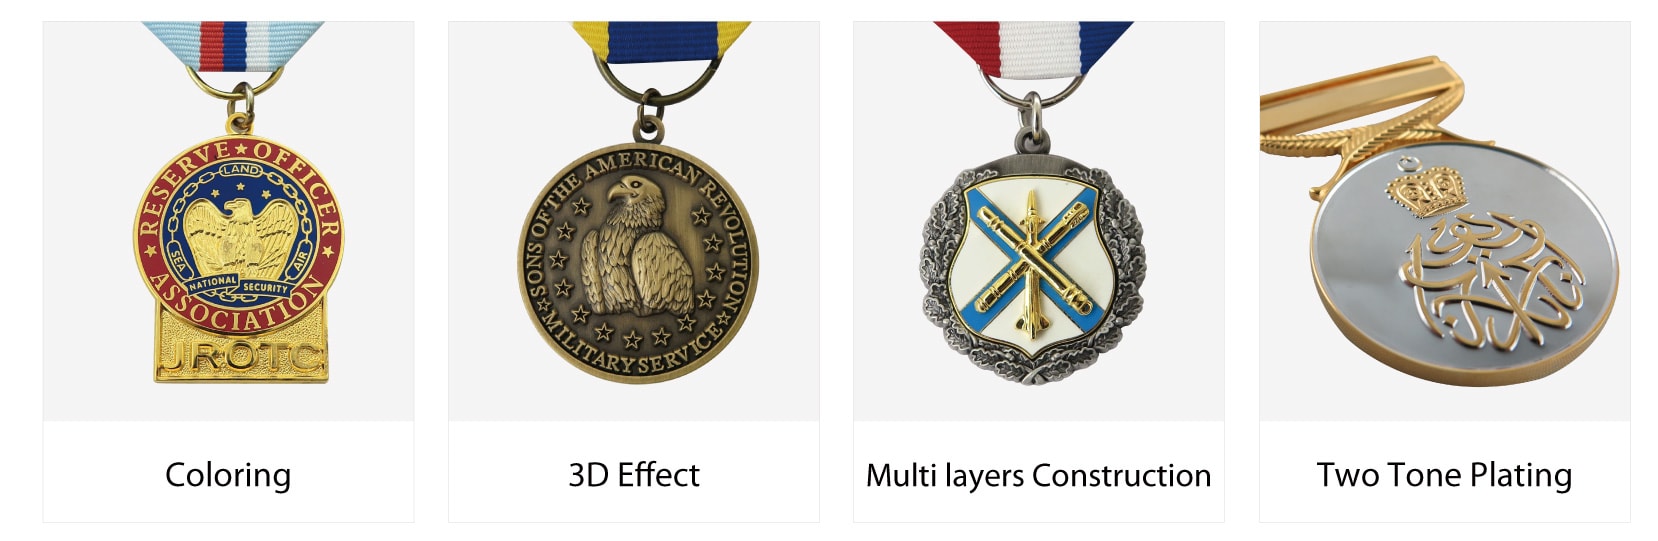 medallion process options from brilliant-promotions.com